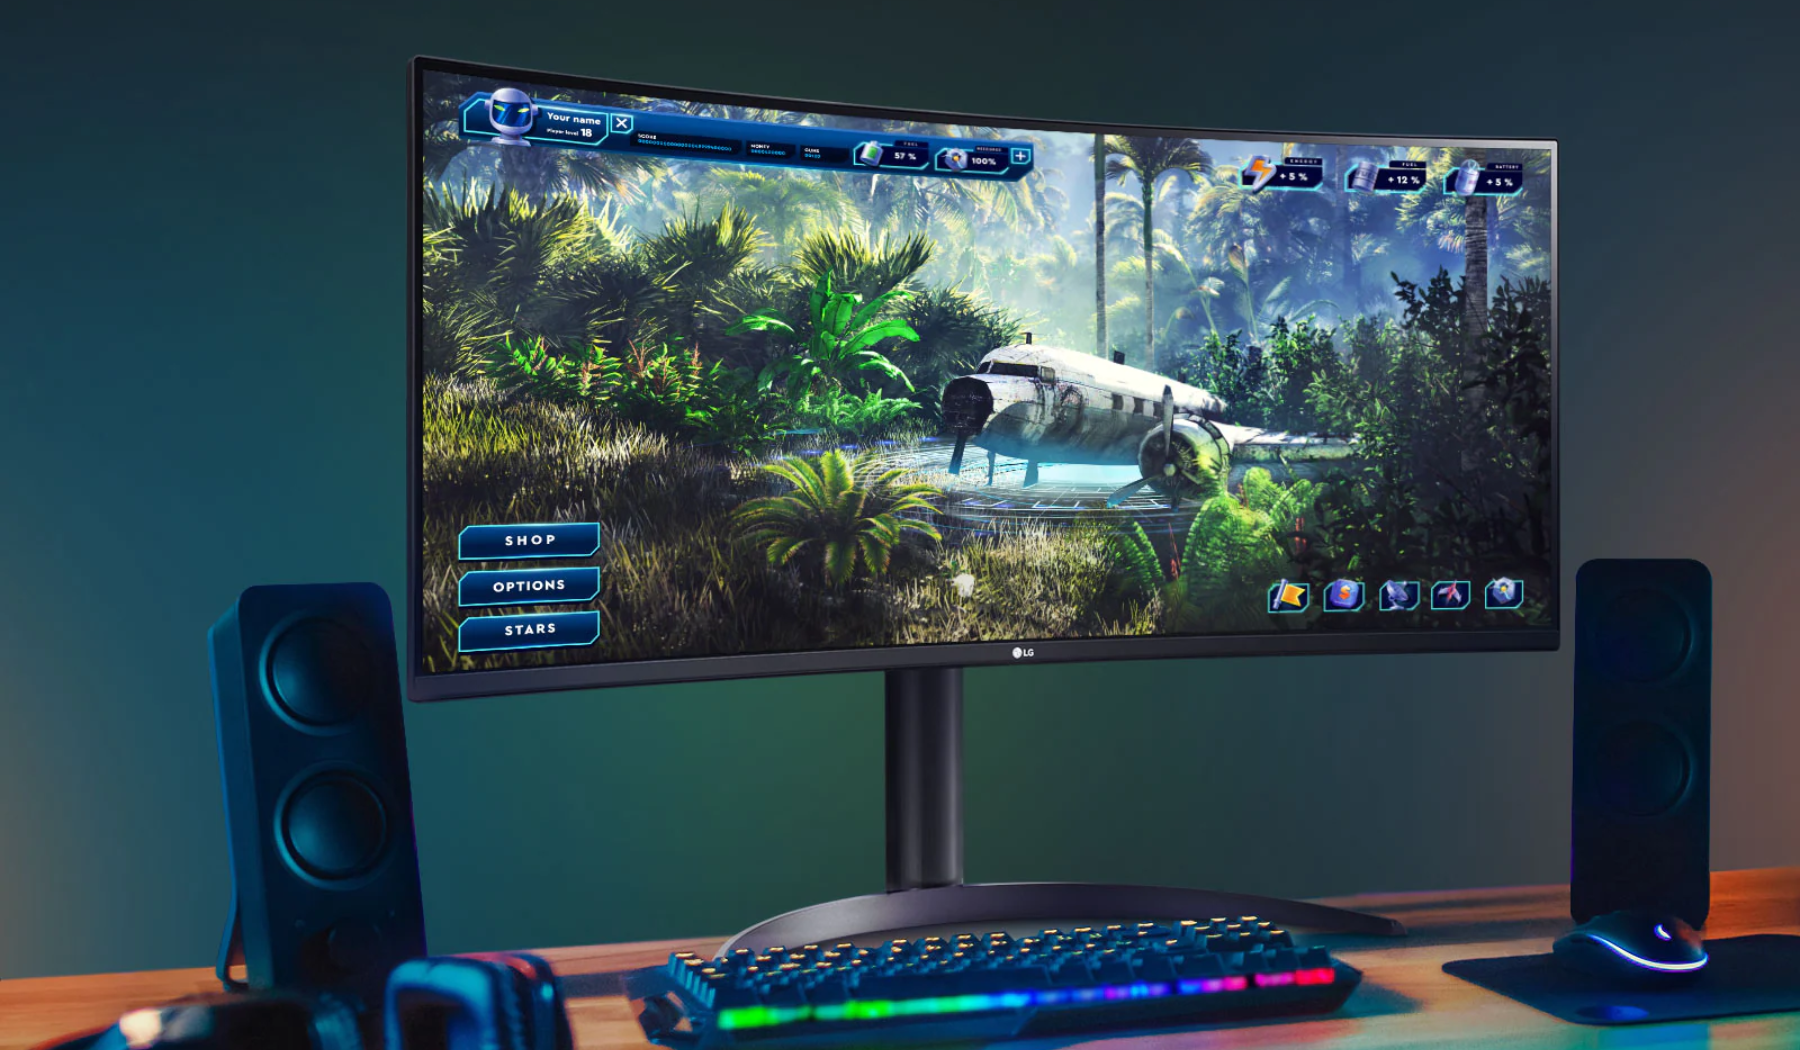 LG curved monitor on desk with speakers and keyboard